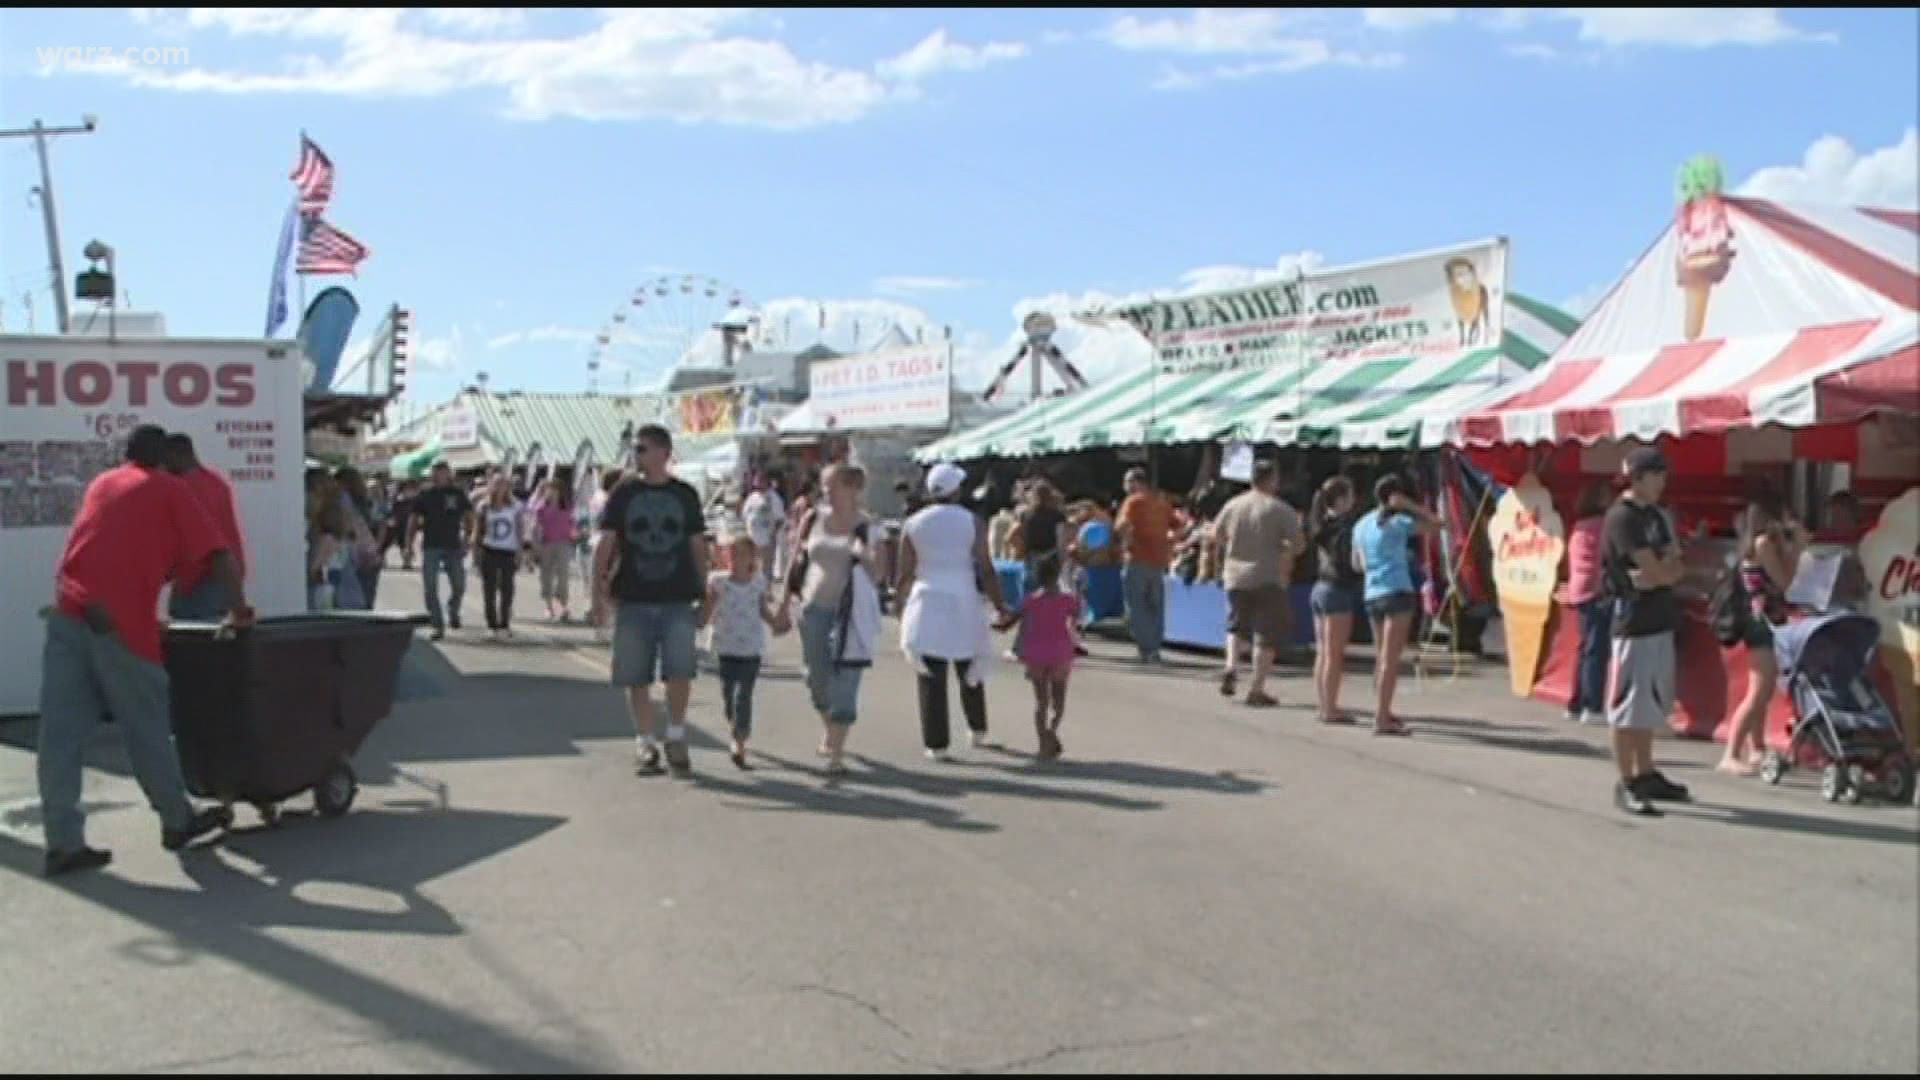 The Erie County Fair is officially in search of this year's Ultimate Fan-goer! The fair says this special annual title is awarded every year.